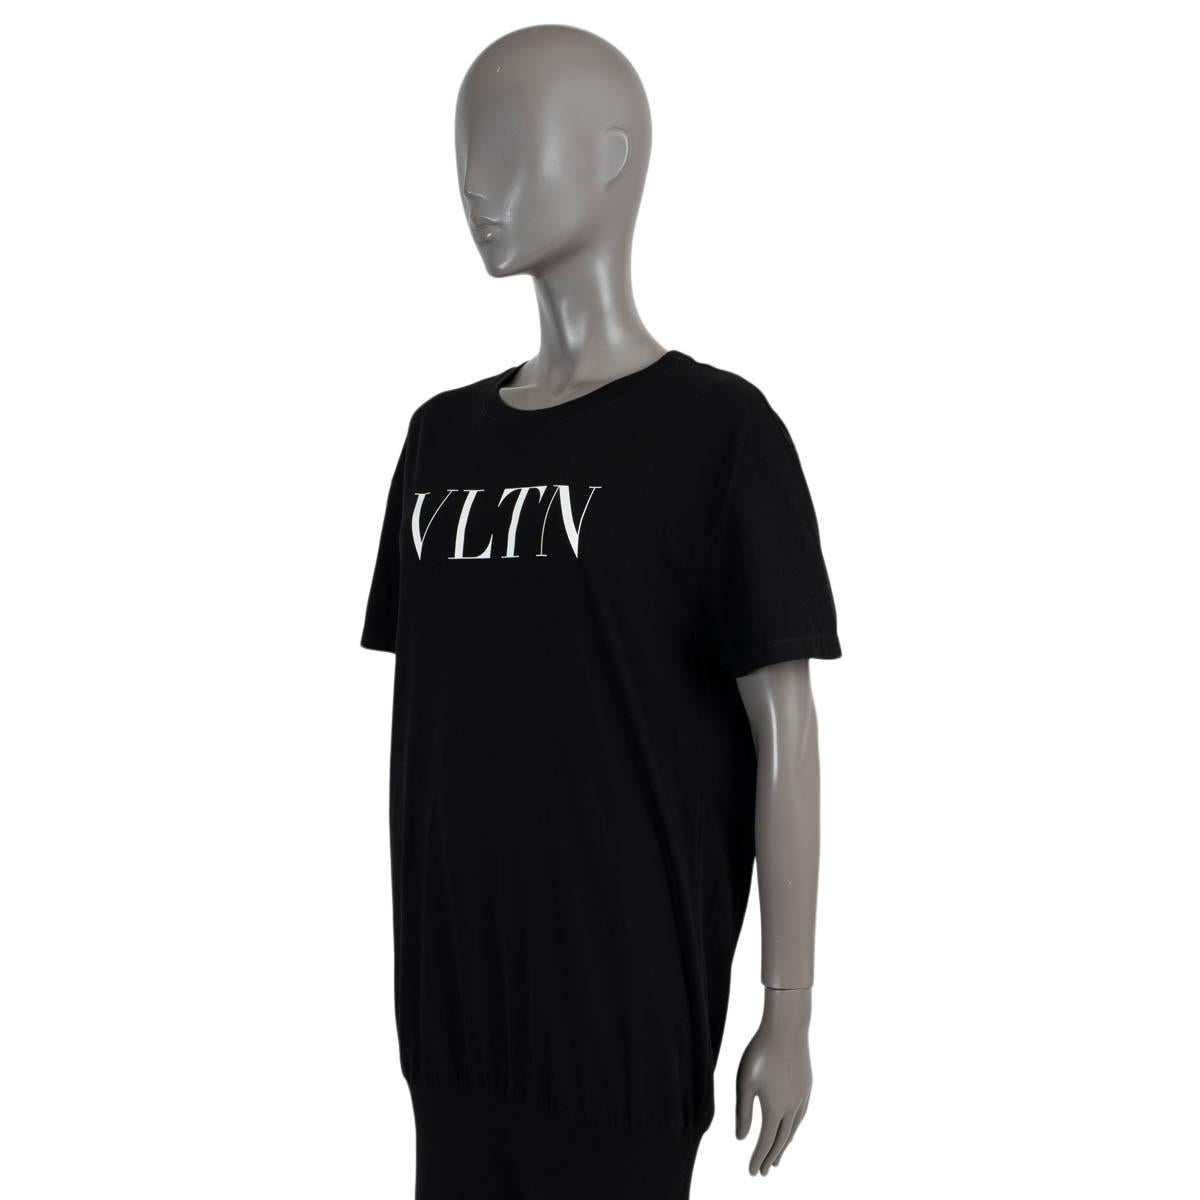 100% authentic Valentino T-shirt dress in black jersey cotton (with 4% elastane). Features white VLTN logo print on the front and wide rib-knit hem. Unlined. Has been worn and is in excellent condition.    

2021